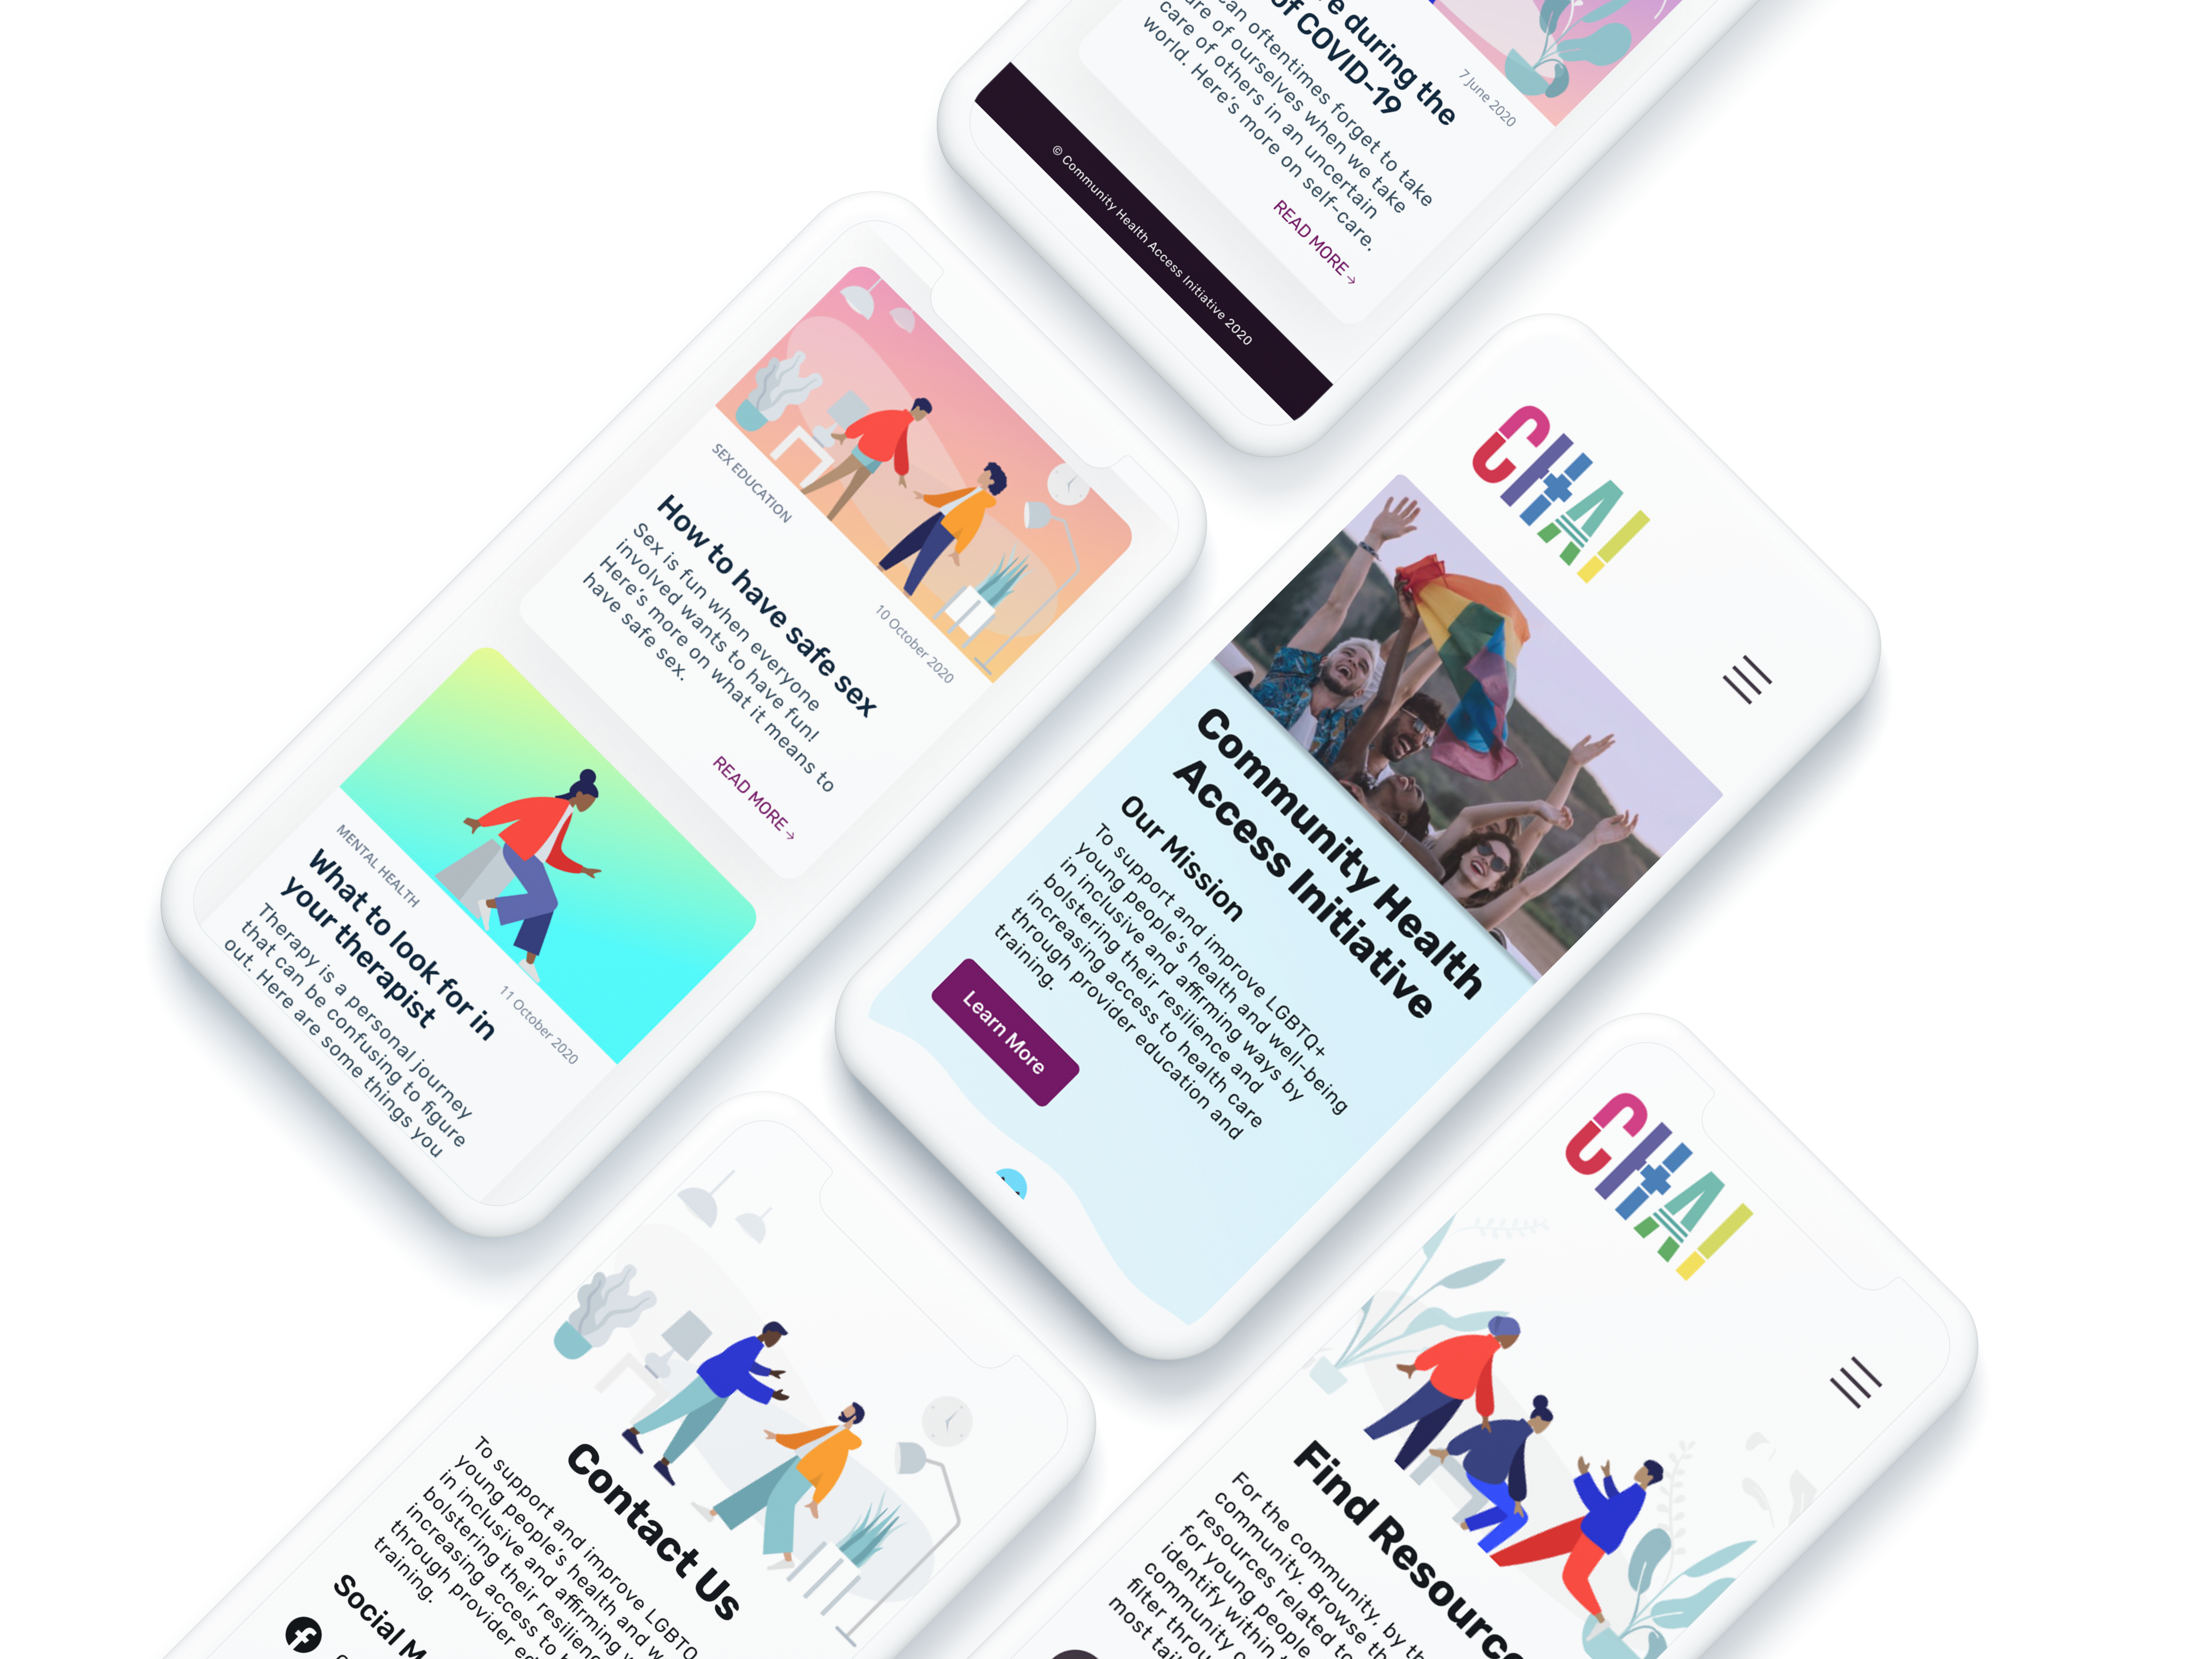 Artfully arranged mobile phones showcase further mockup designs of a reimagined CHAI website.